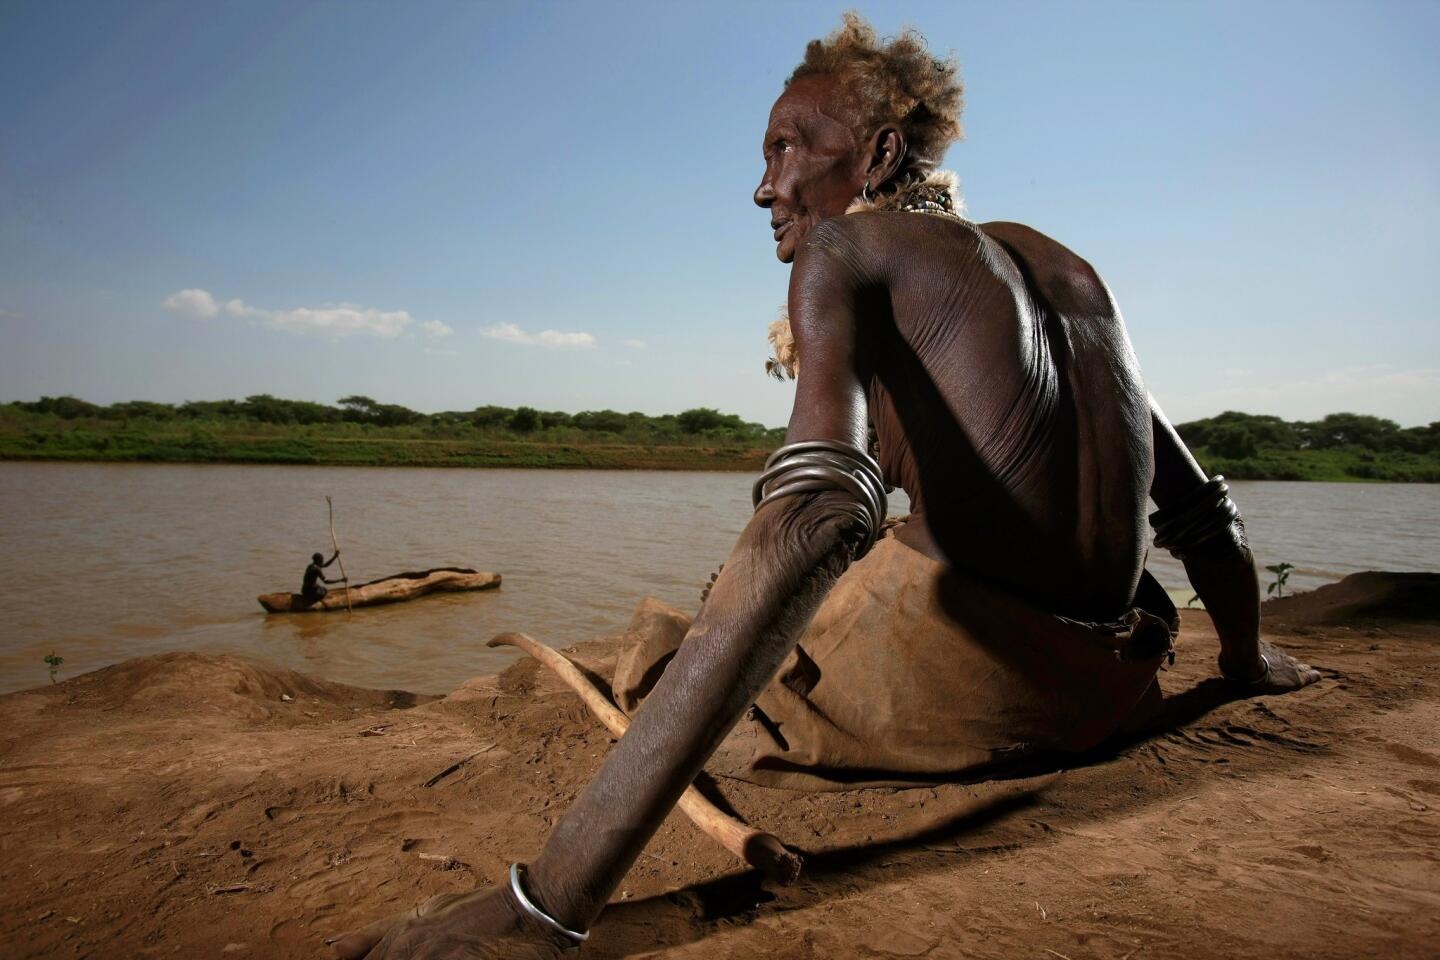 The Dassanech people of Omo Valley